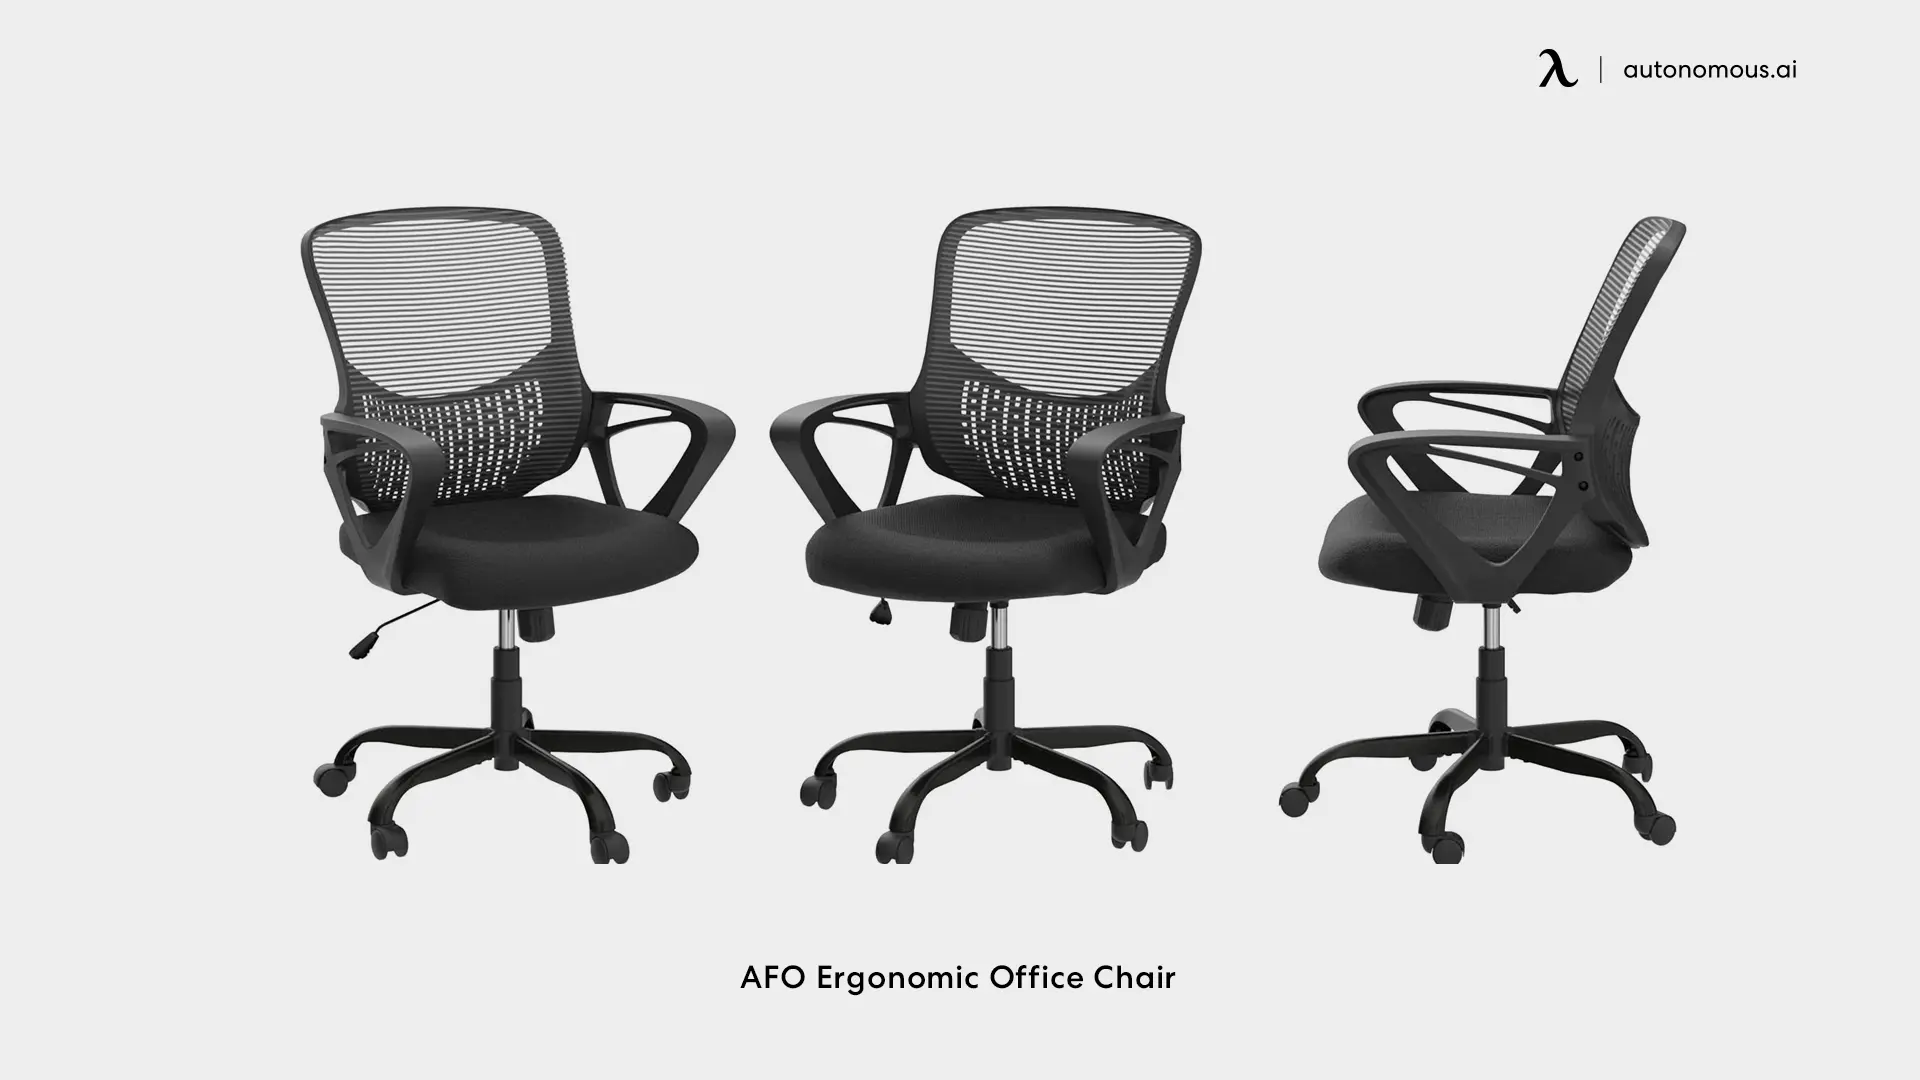 AFO Ergonomic Office Chair - gaming chair with footrest